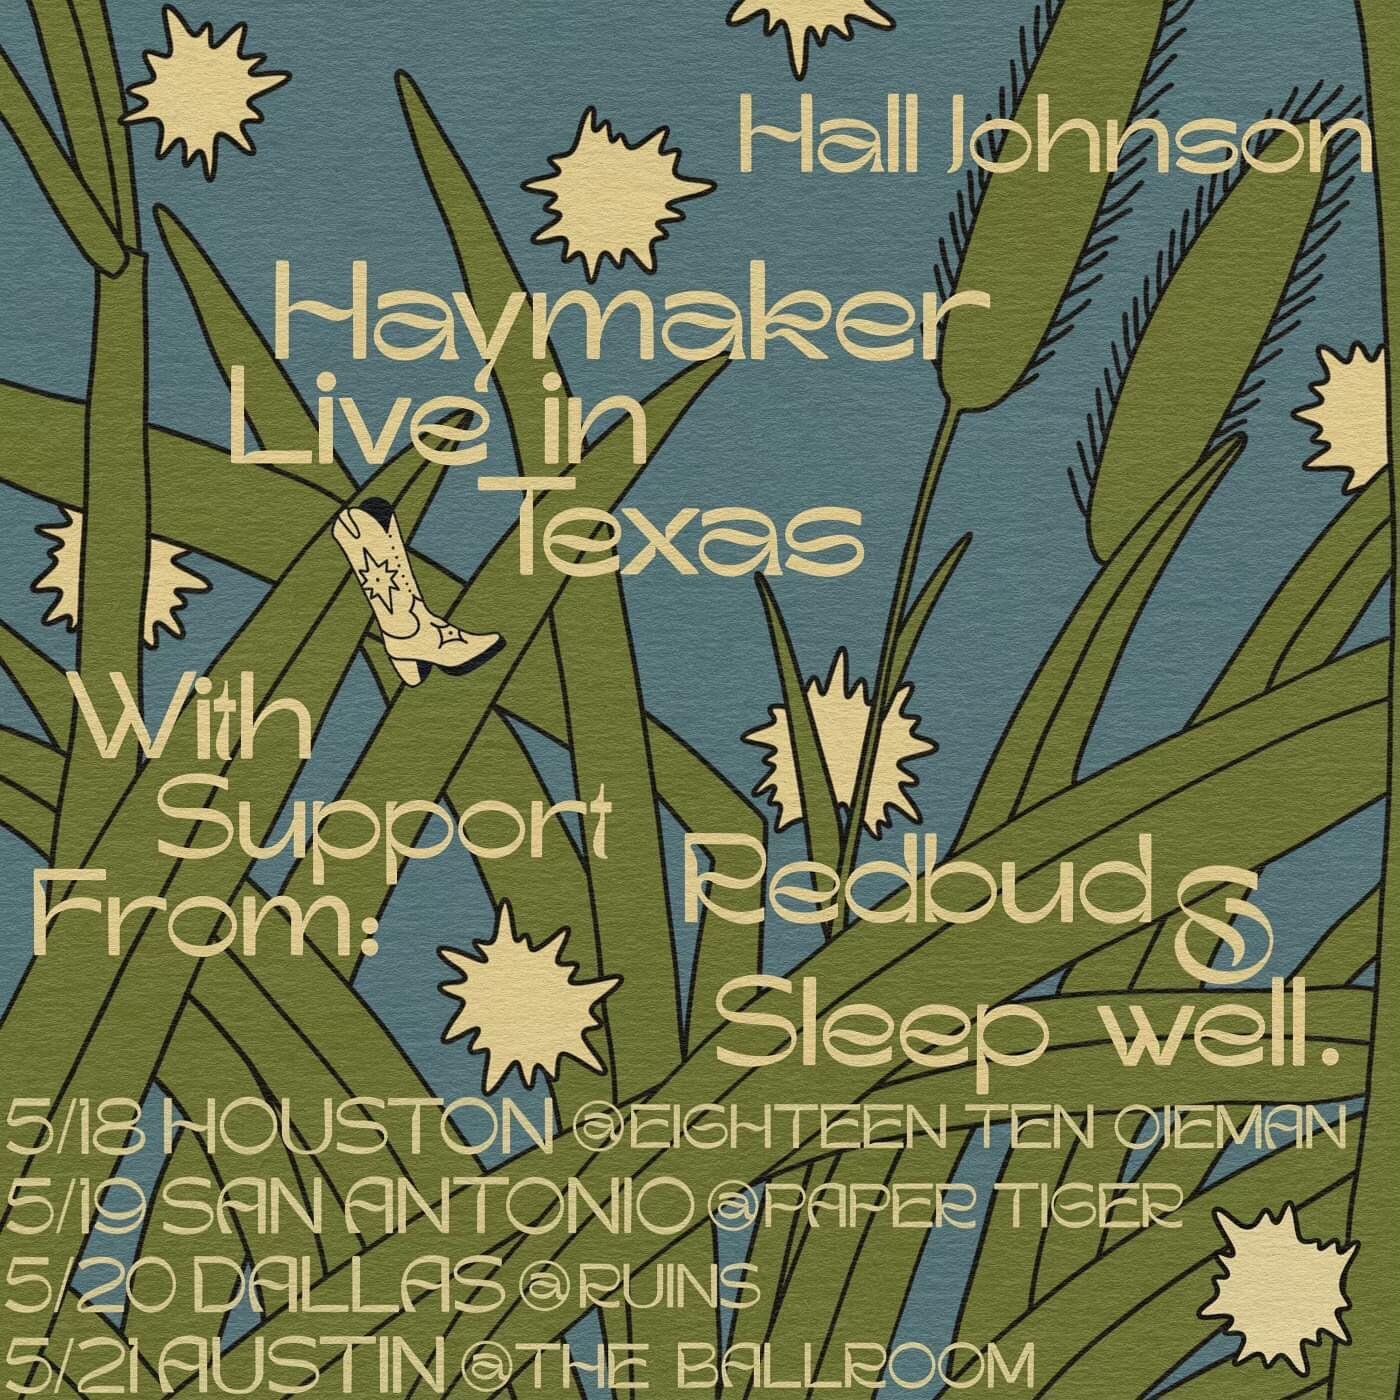 @halljohnsontx heads out on tour later this month to support Haymaker, which comes out next week! 

5/18 Houston
5/19 San Antonio
5/20 Dallas
5/21 Austin

See them if you are in Texas, and pick up Haymaker on vinyl if you haven&rsquo;t yet